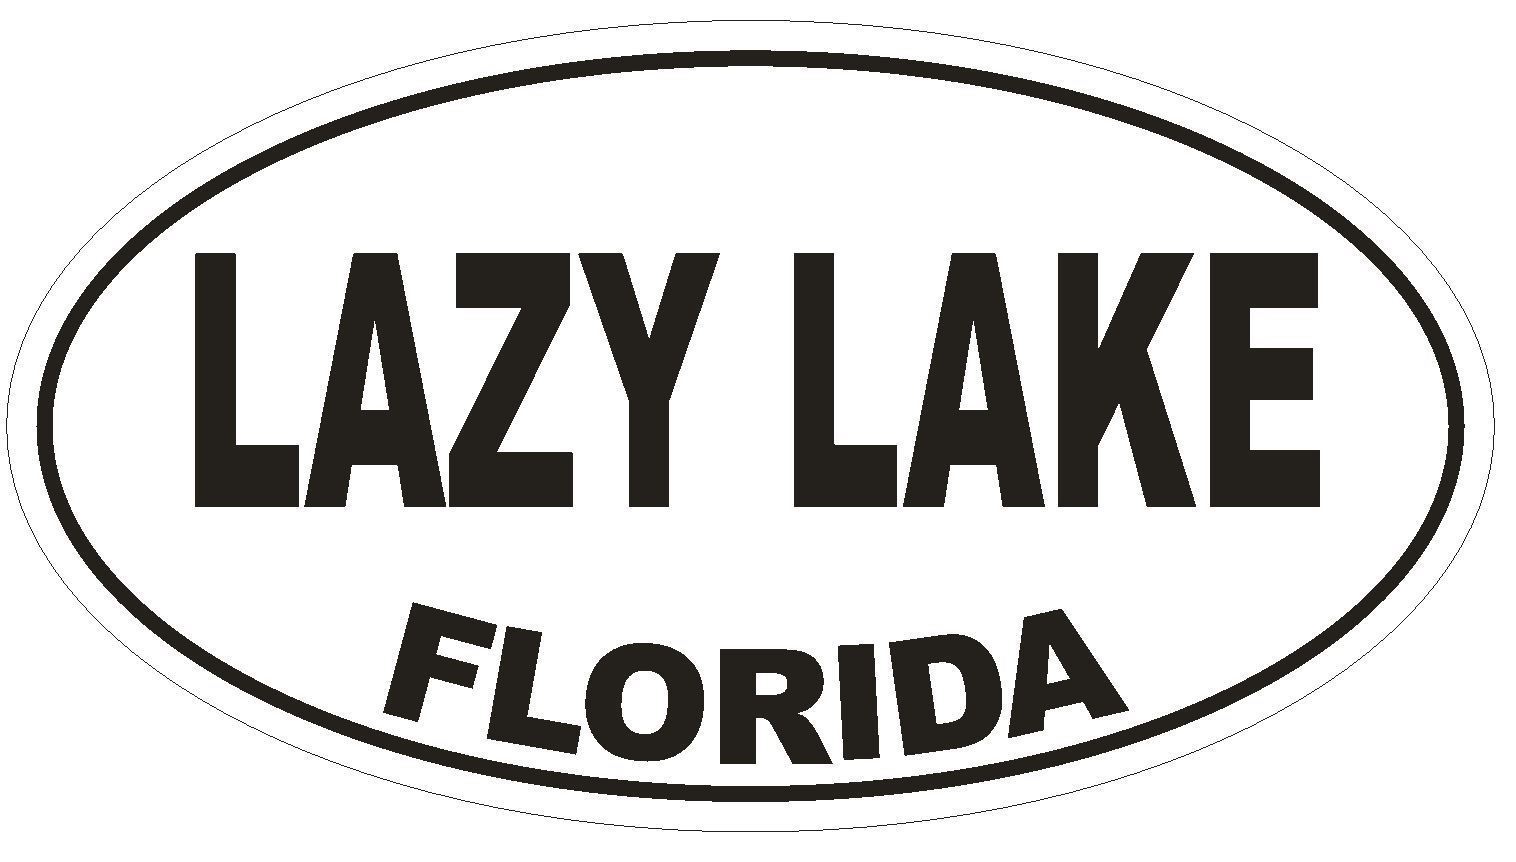 Lazy Lake Florida Oval Bumper Sticker or Helmet Sticker D2598 Euro Oval Decal - $1.39 - $75.00